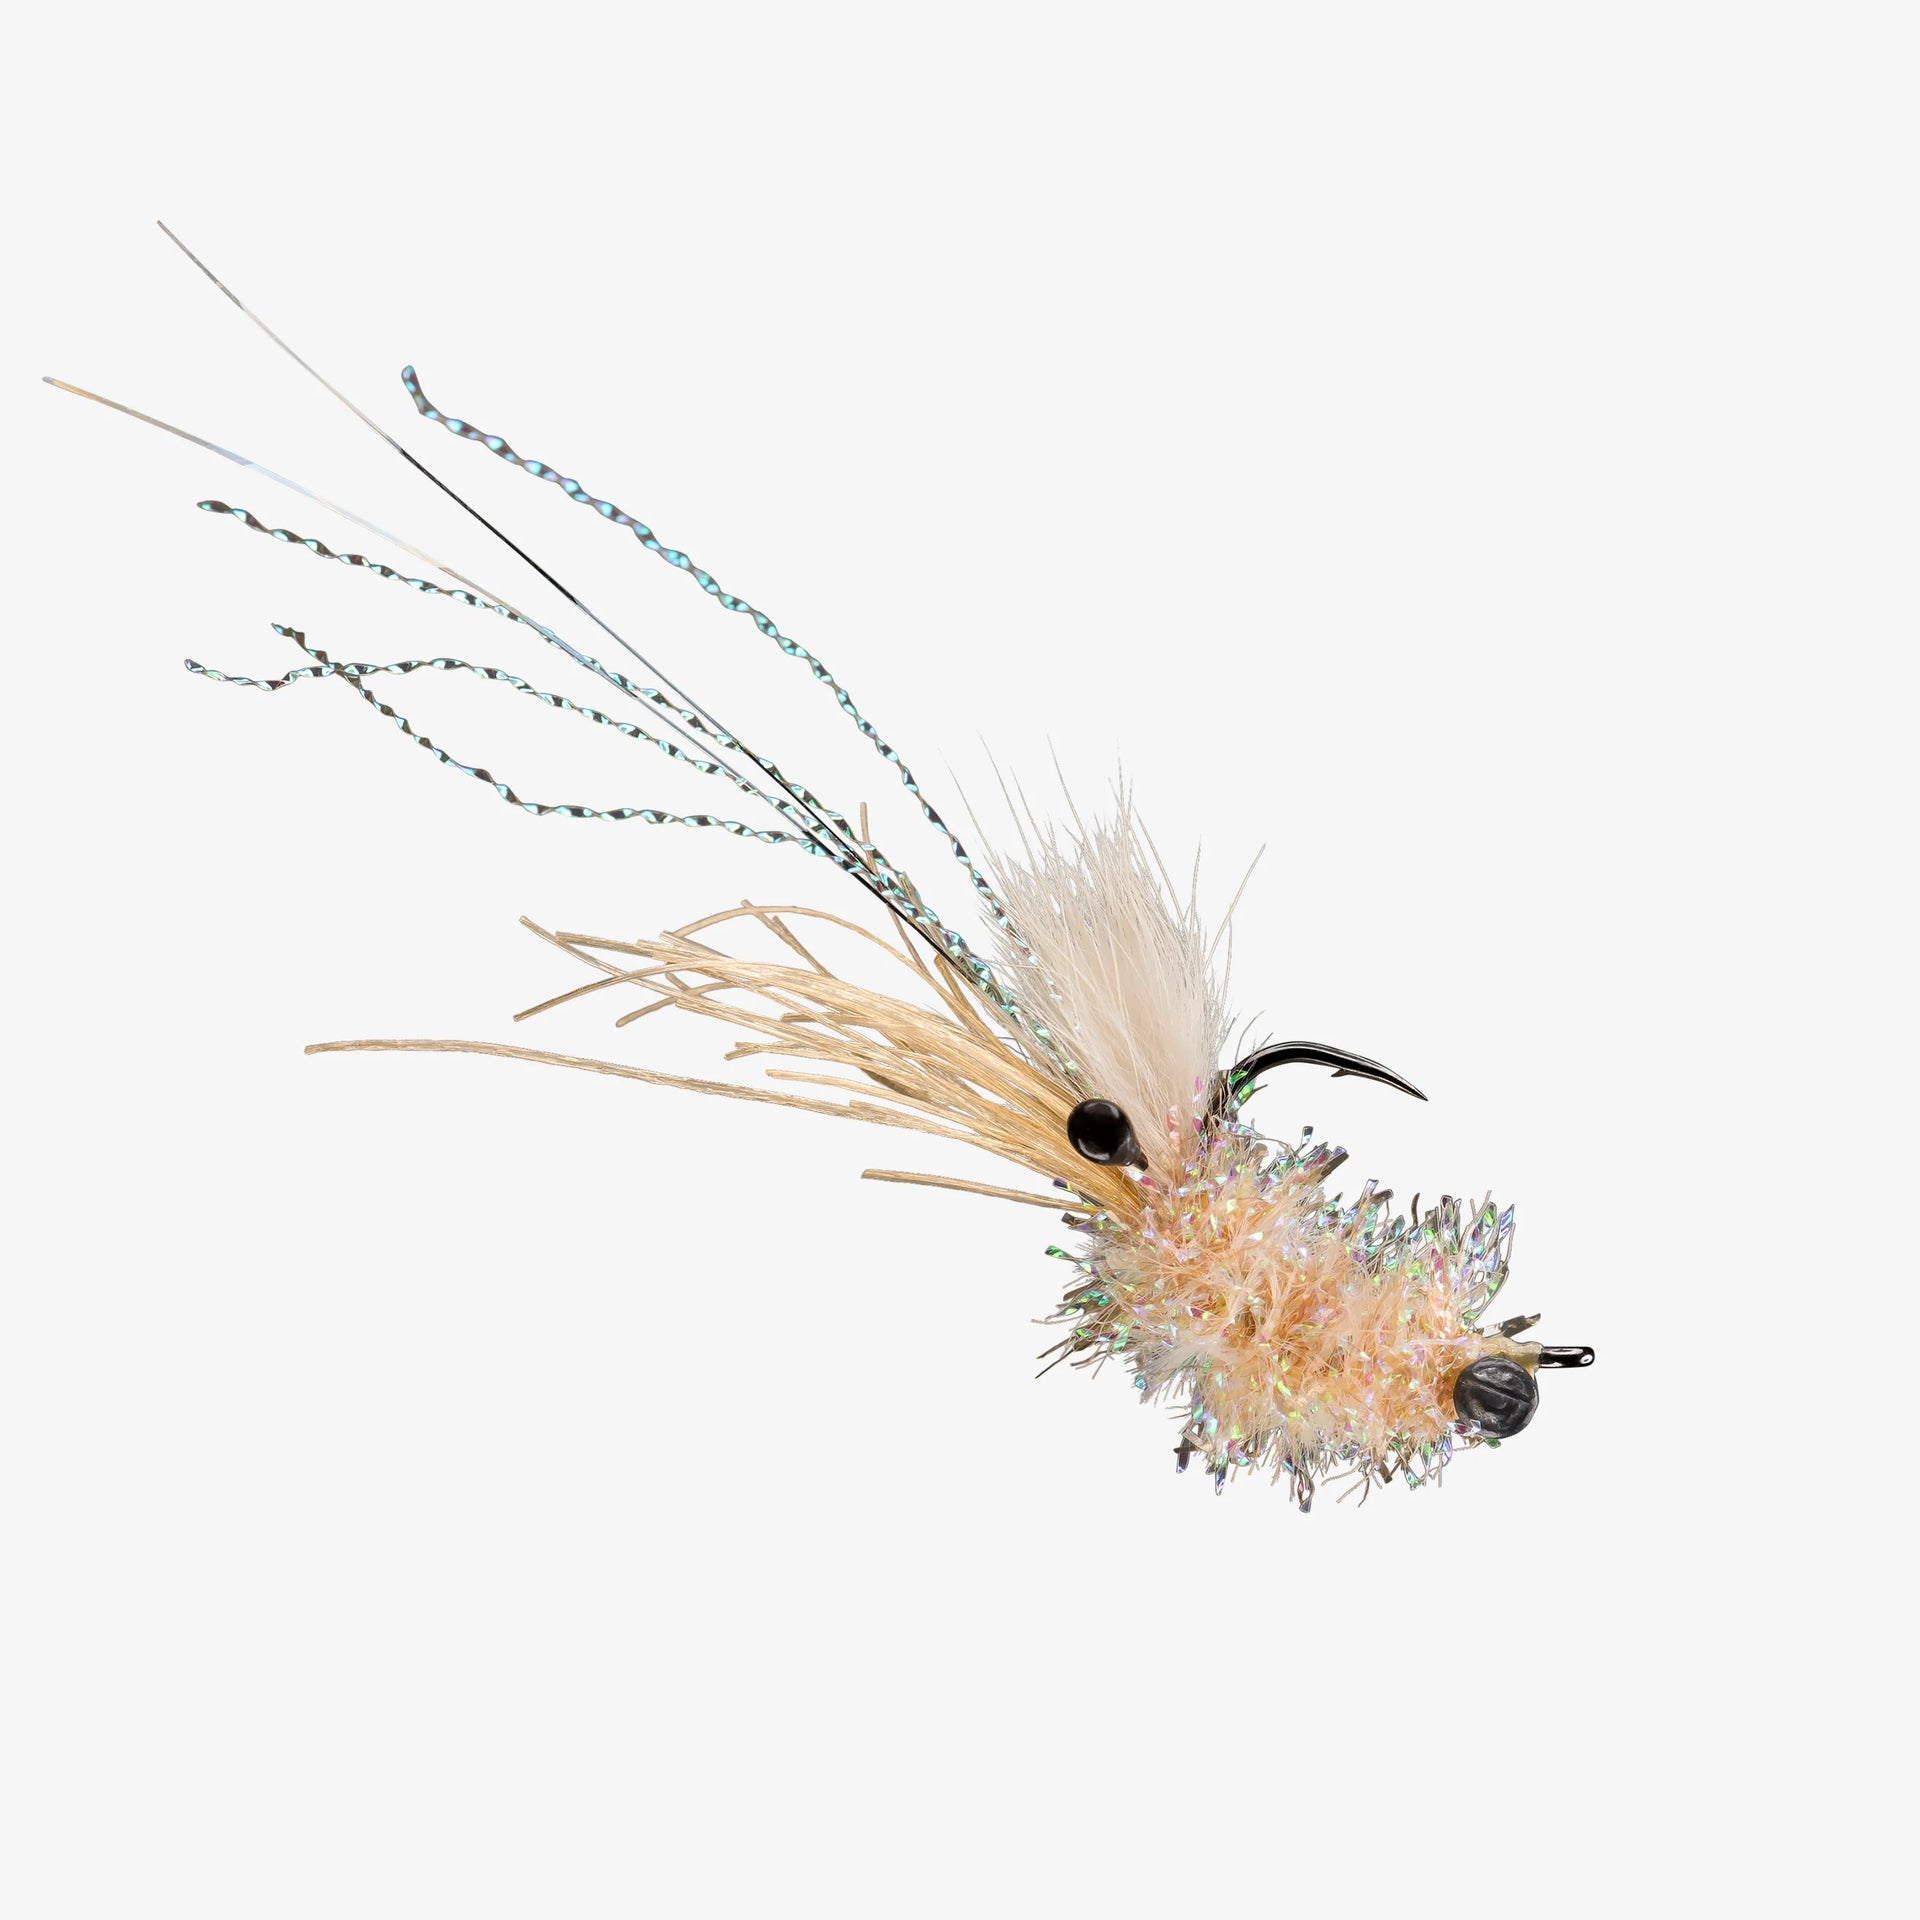 Best Flies for the Bahamas